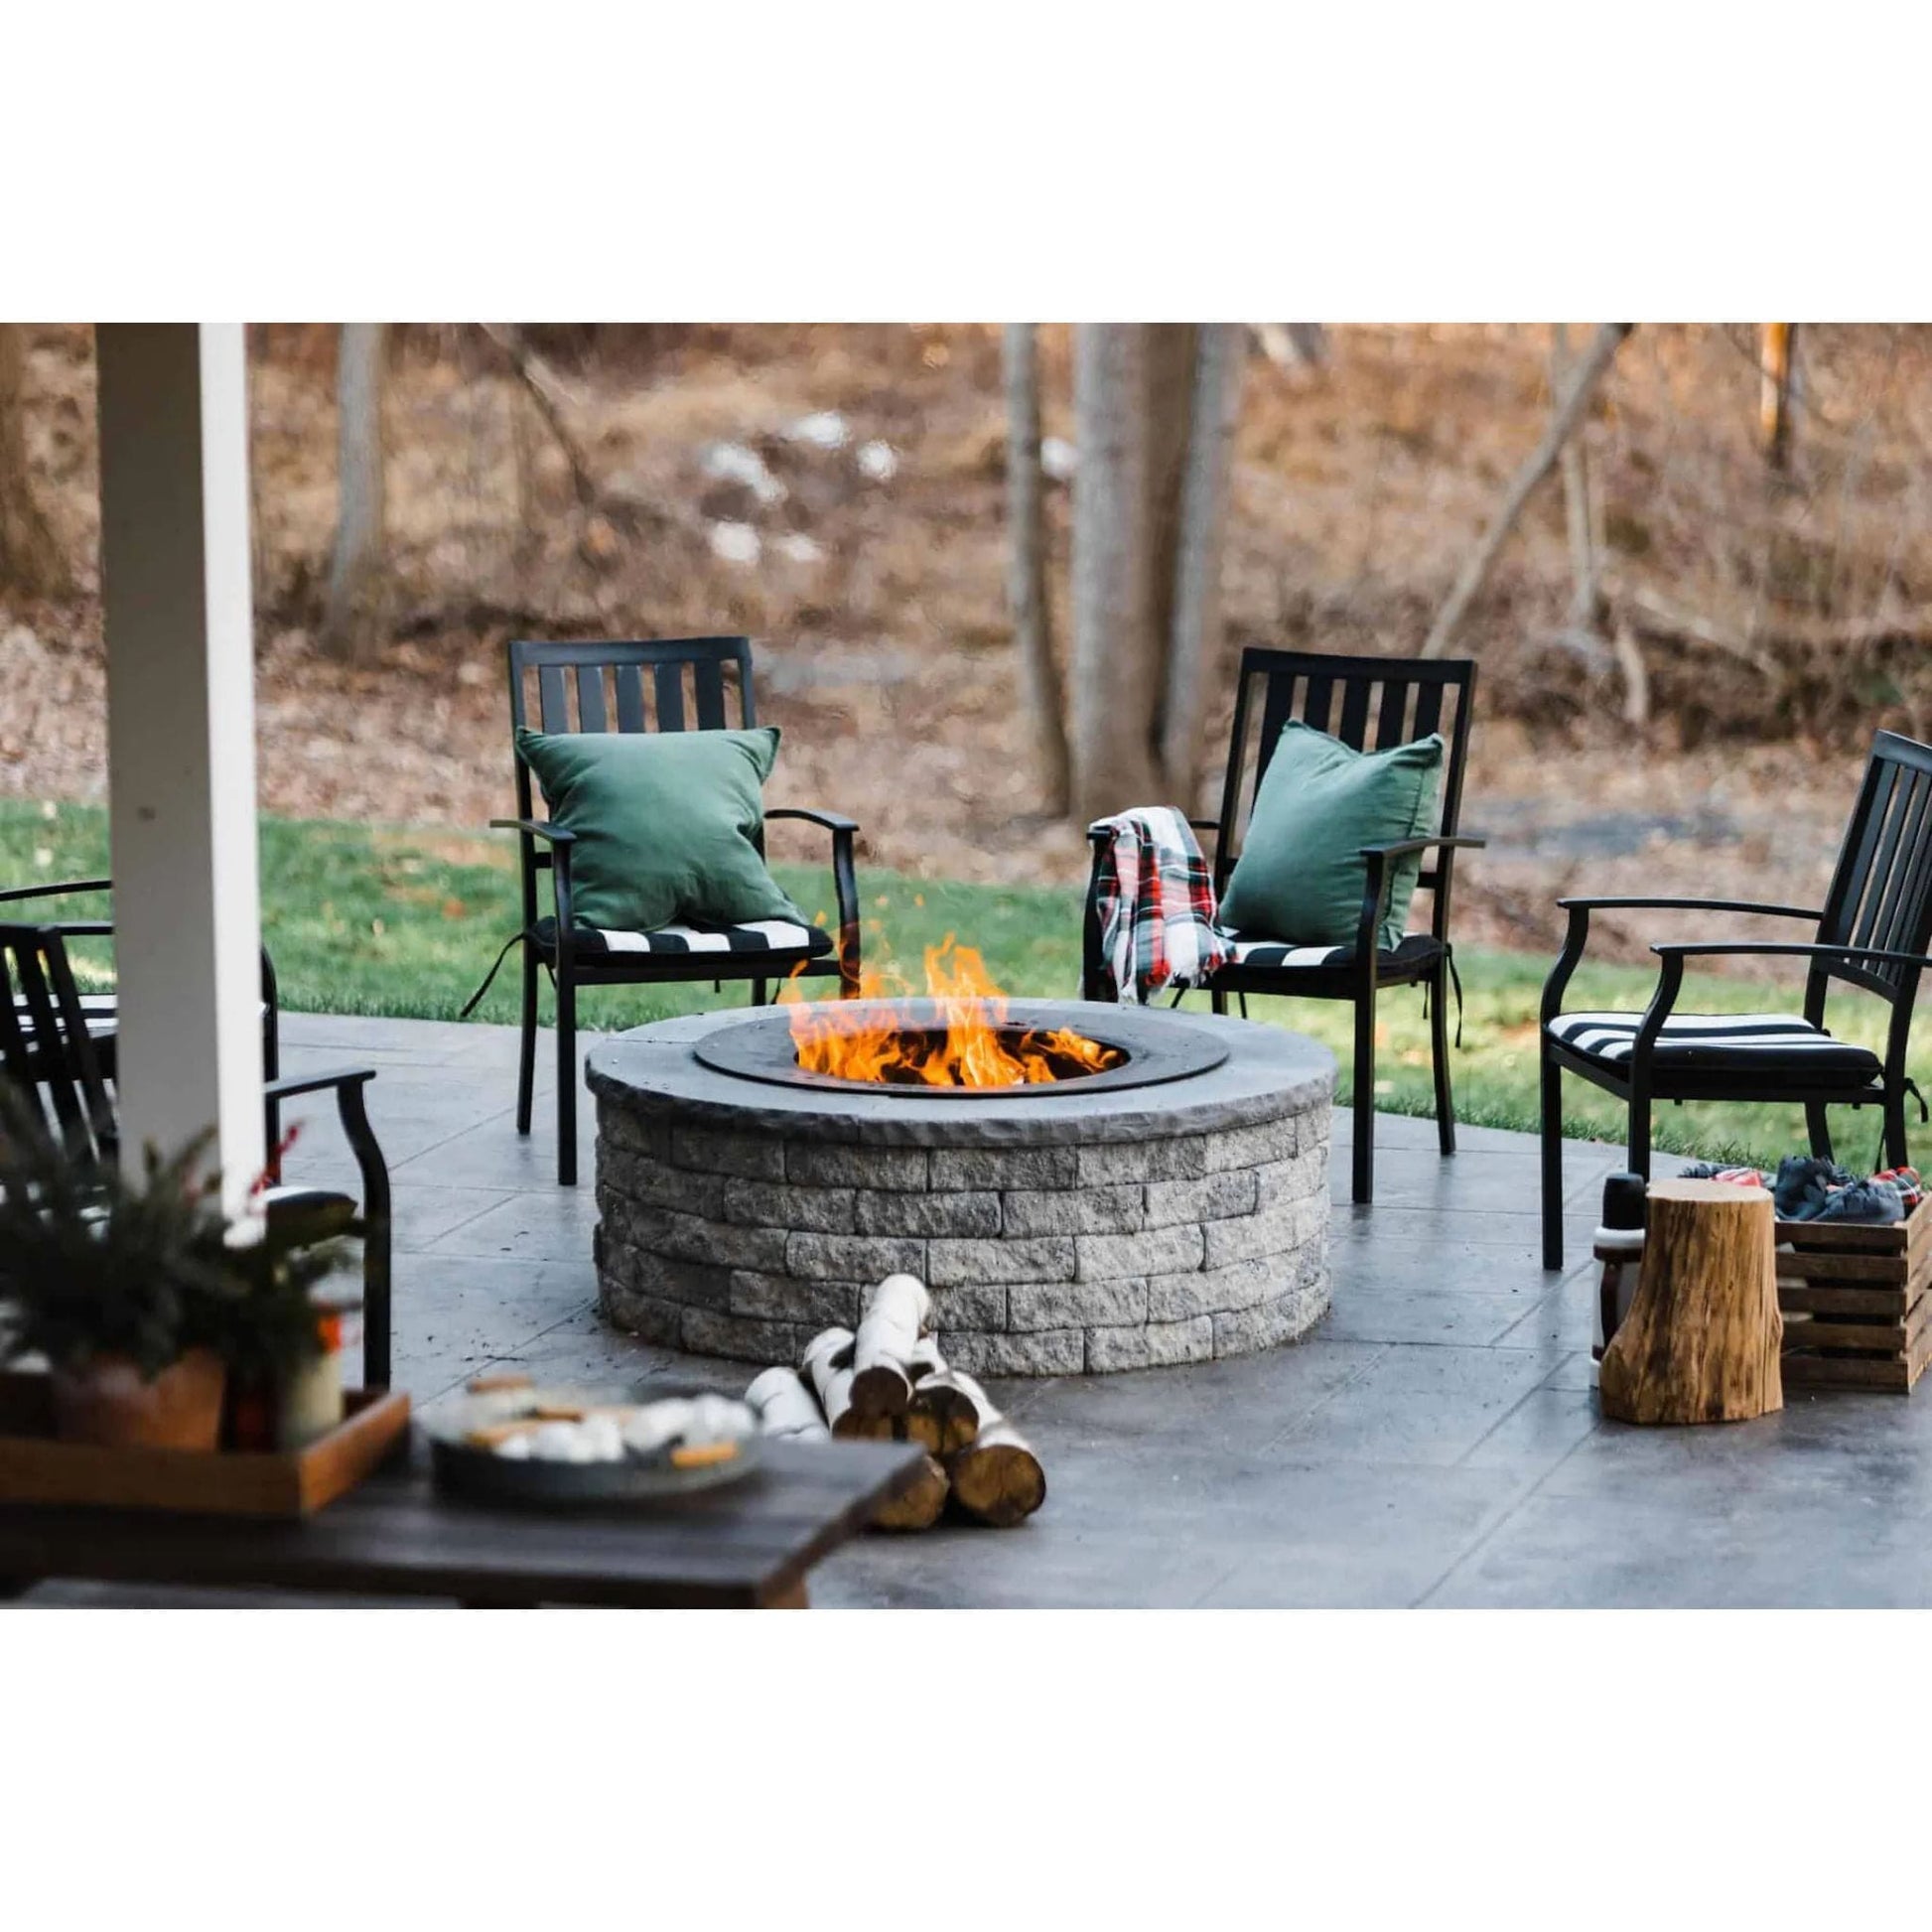 Zentro 24" Round Steel Smokeless Fire Pit Insert With Lid